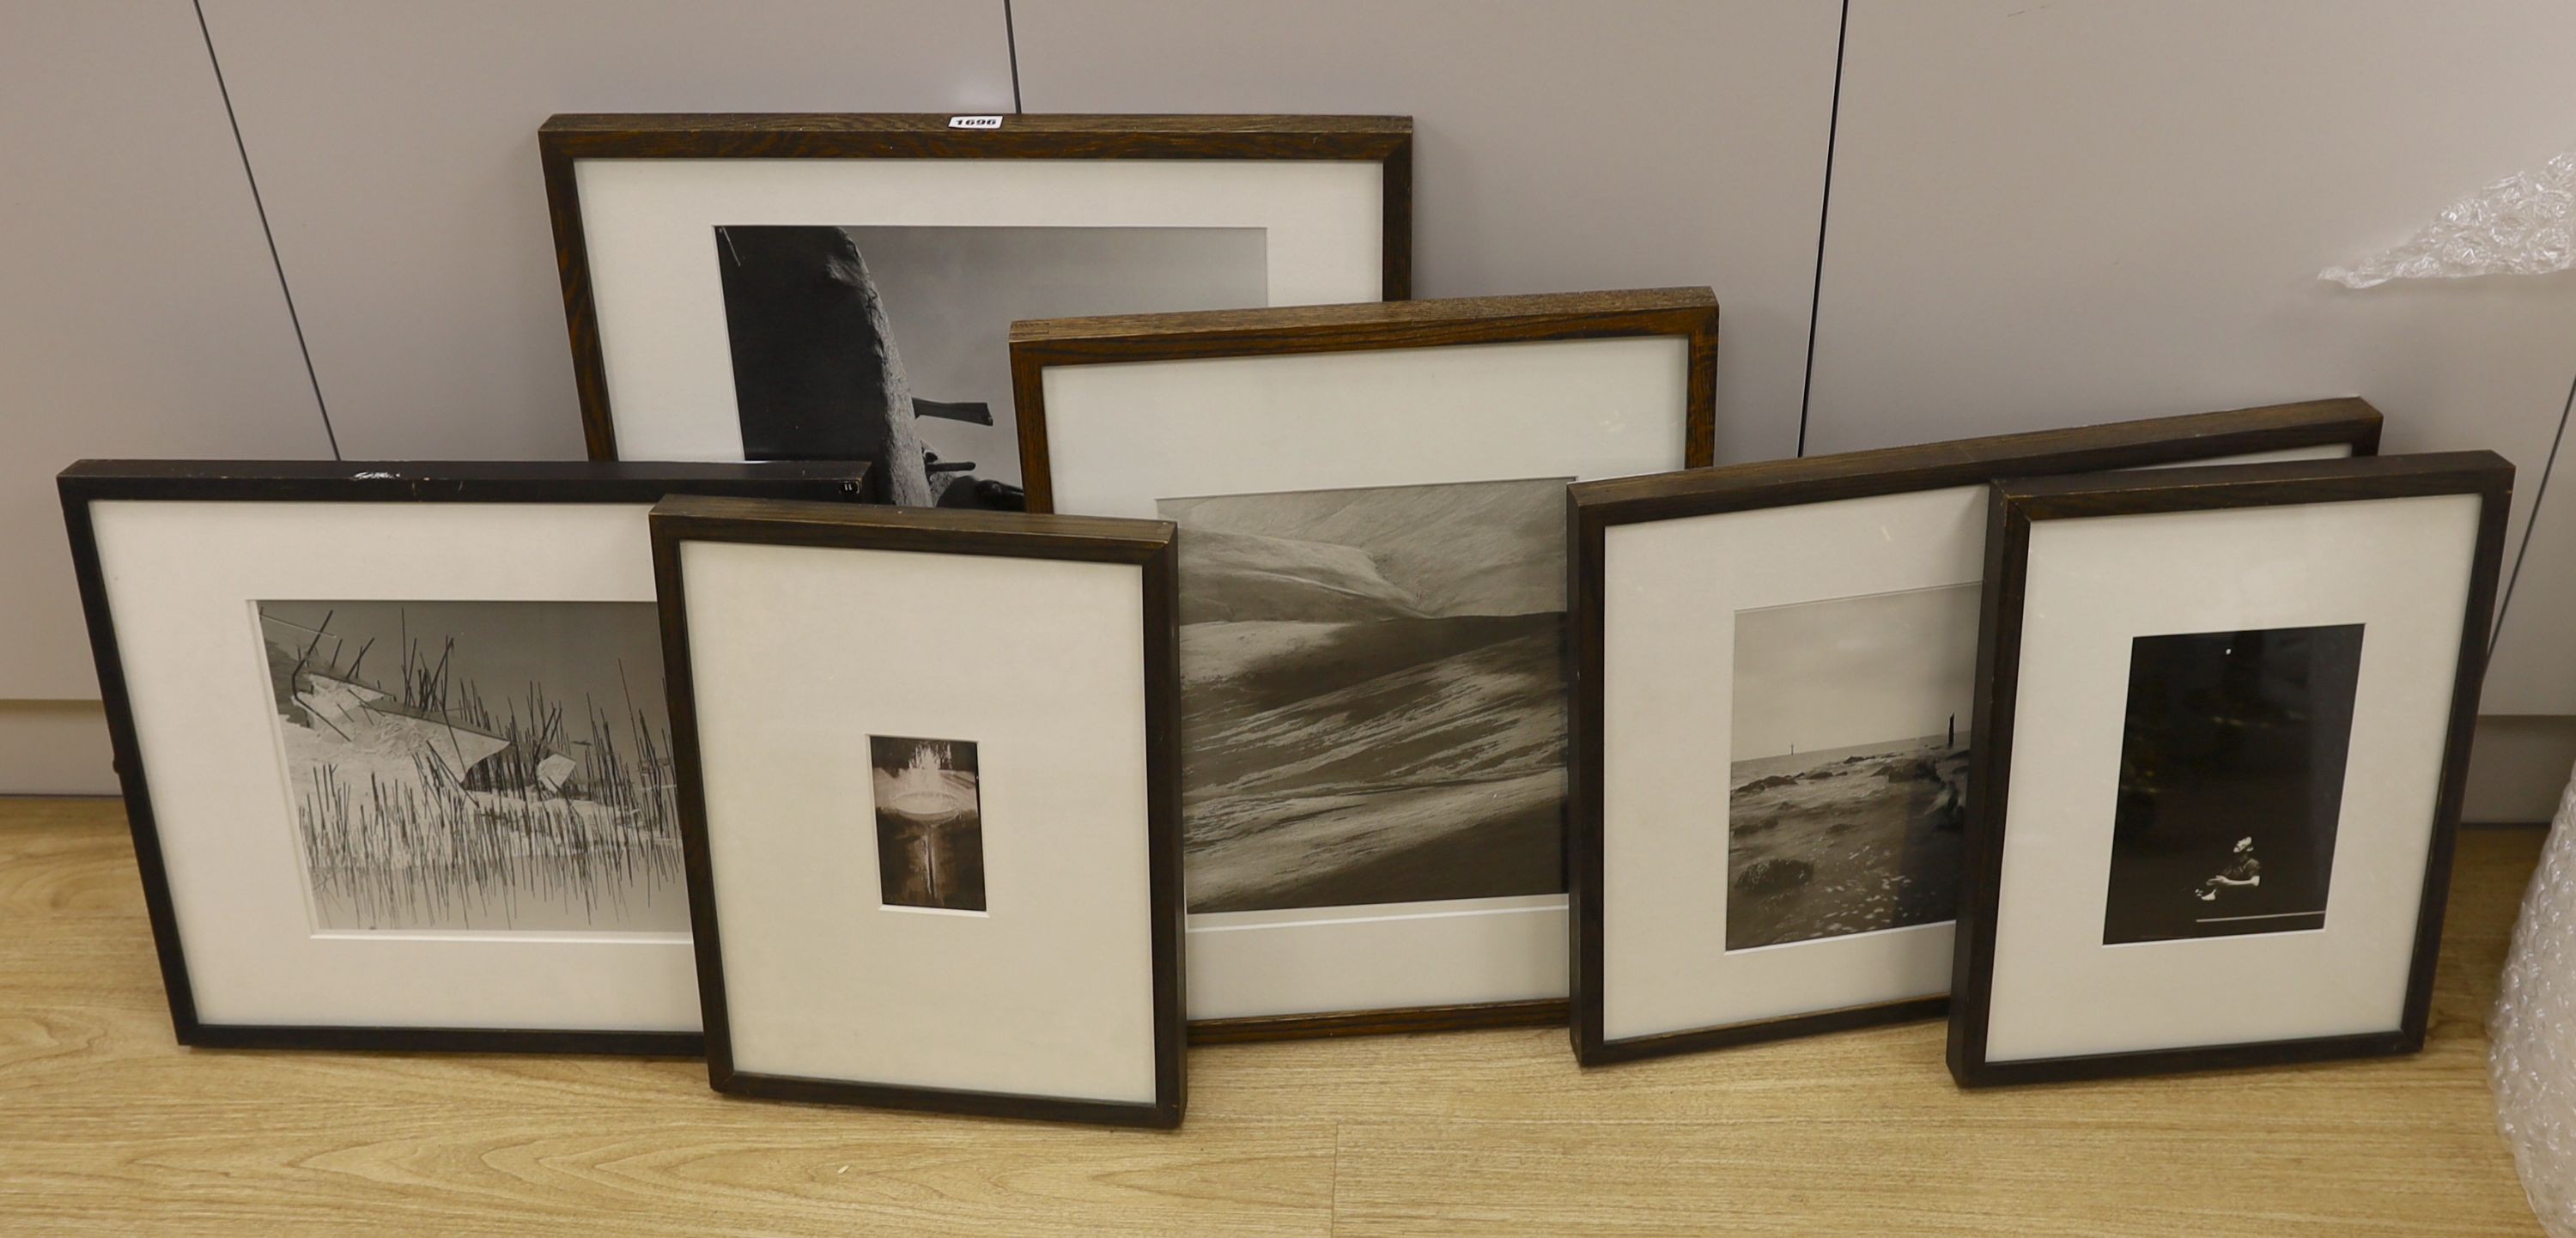 Six assorted contemporary black and white photographs including: Un-named landscape, 33 x 26cm; Abstract, 25 x 31cm, David Hiscock, 'Gymnasium Equipment', 12 x 7cm and Eamon McCabe, 'Li Chen Shie', 23 x 15cm